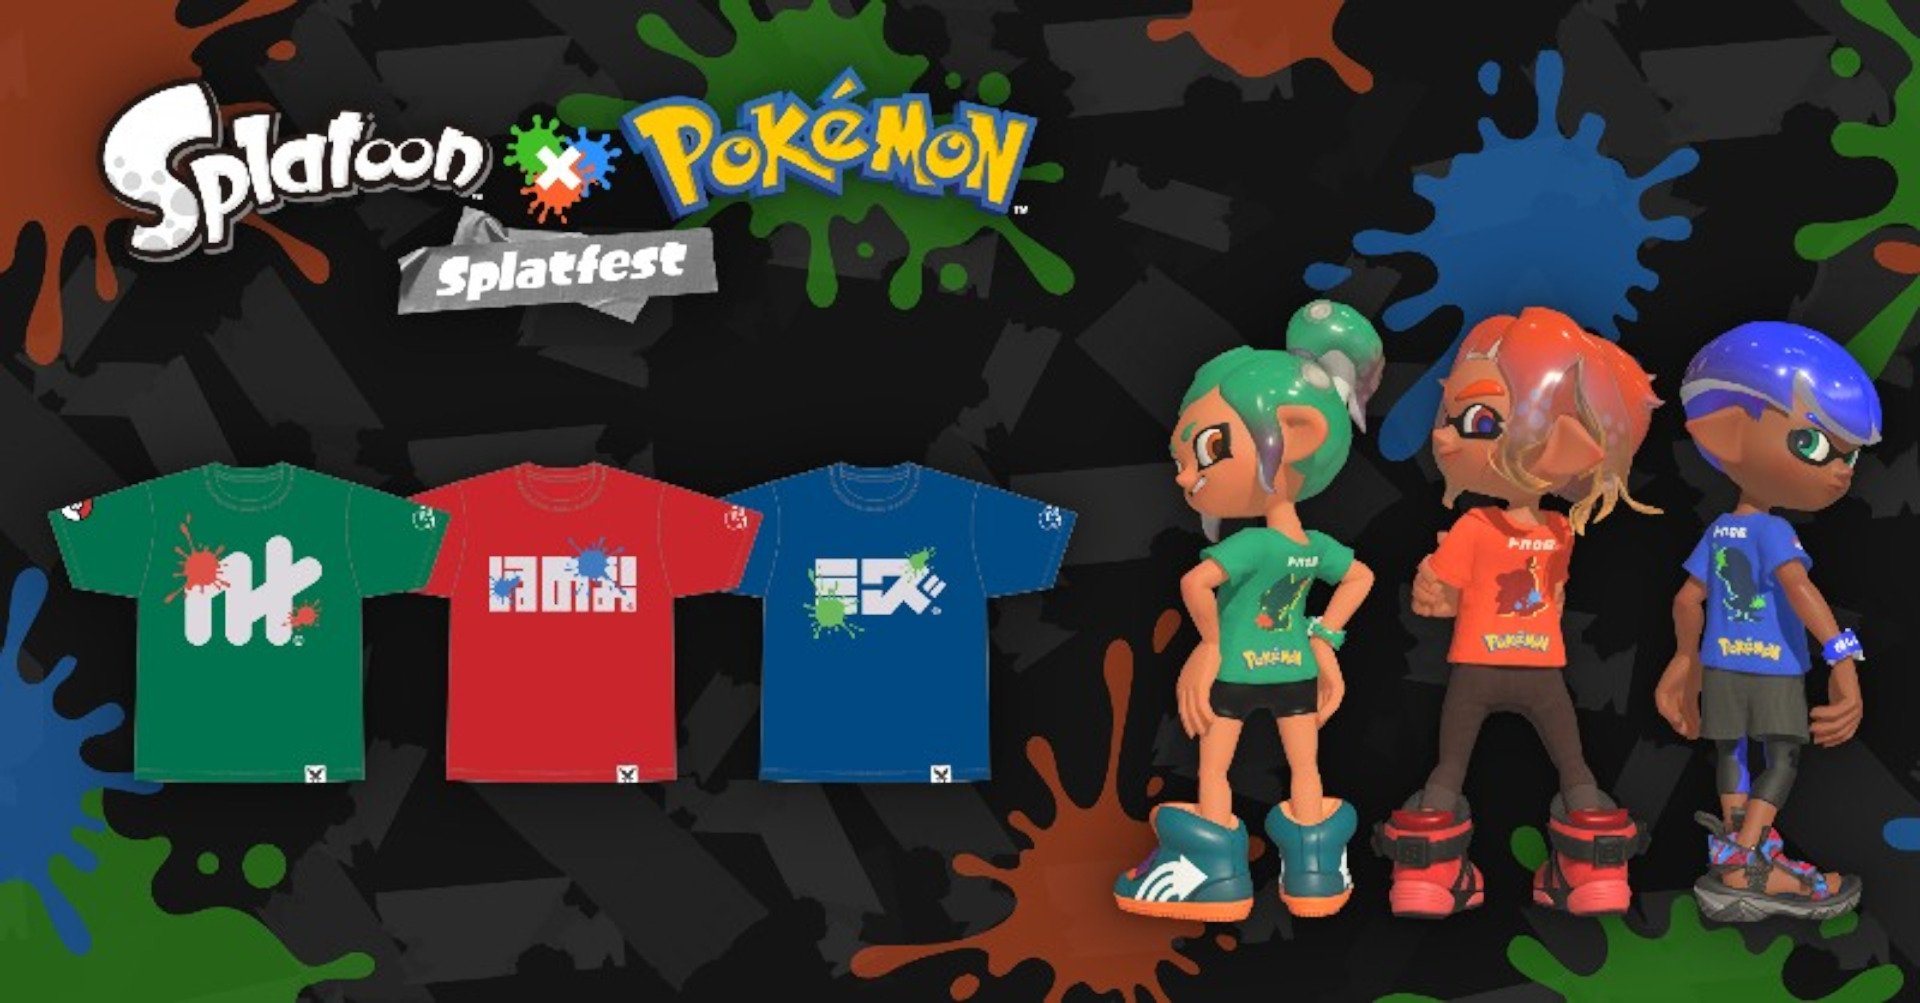 A Twitter image posted by leaker Stealth that shows Splatoon 3 Pokemon Splatfest merchandise and real-world T-shirts as well